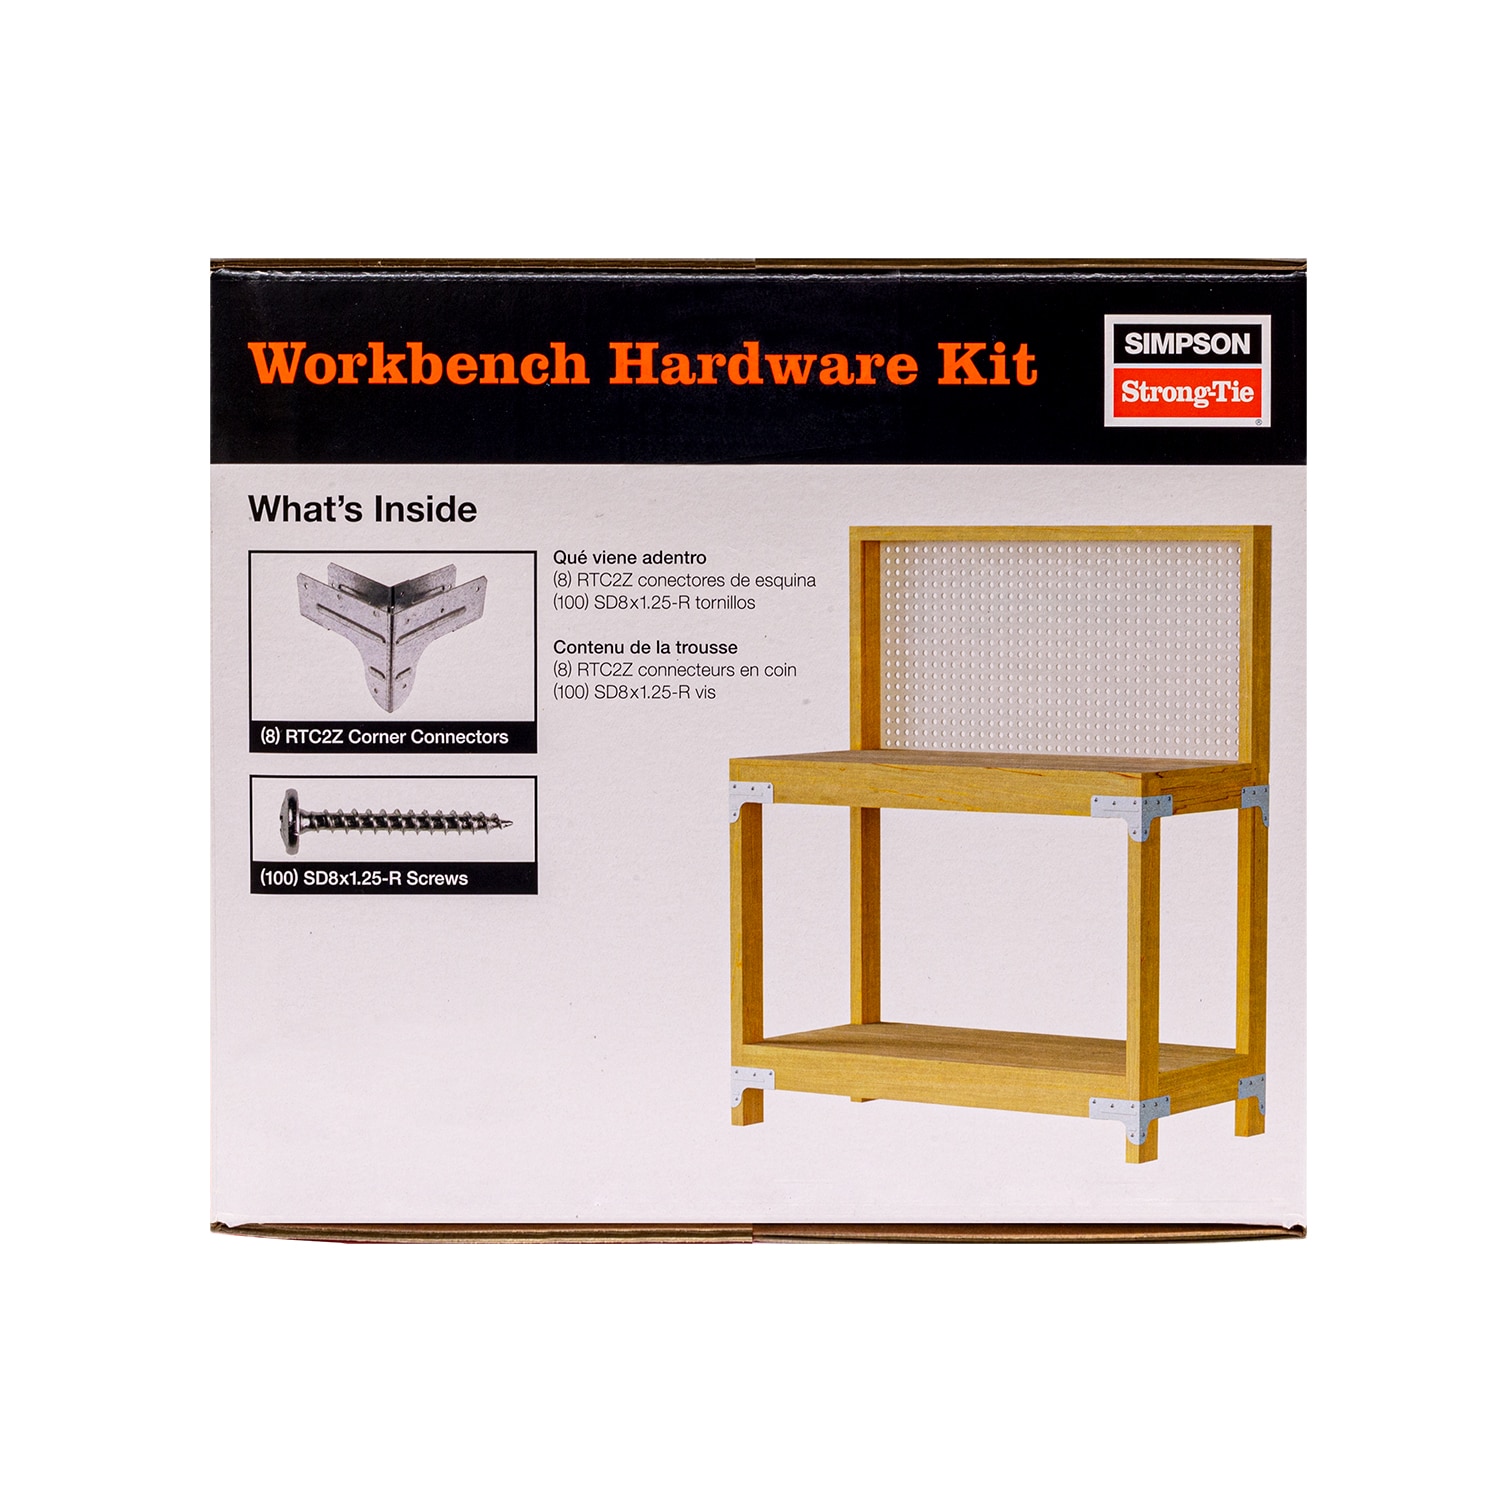 Simpson Strong-Tie DIY Workbench Shelving Kit $23.88 at Lowe's